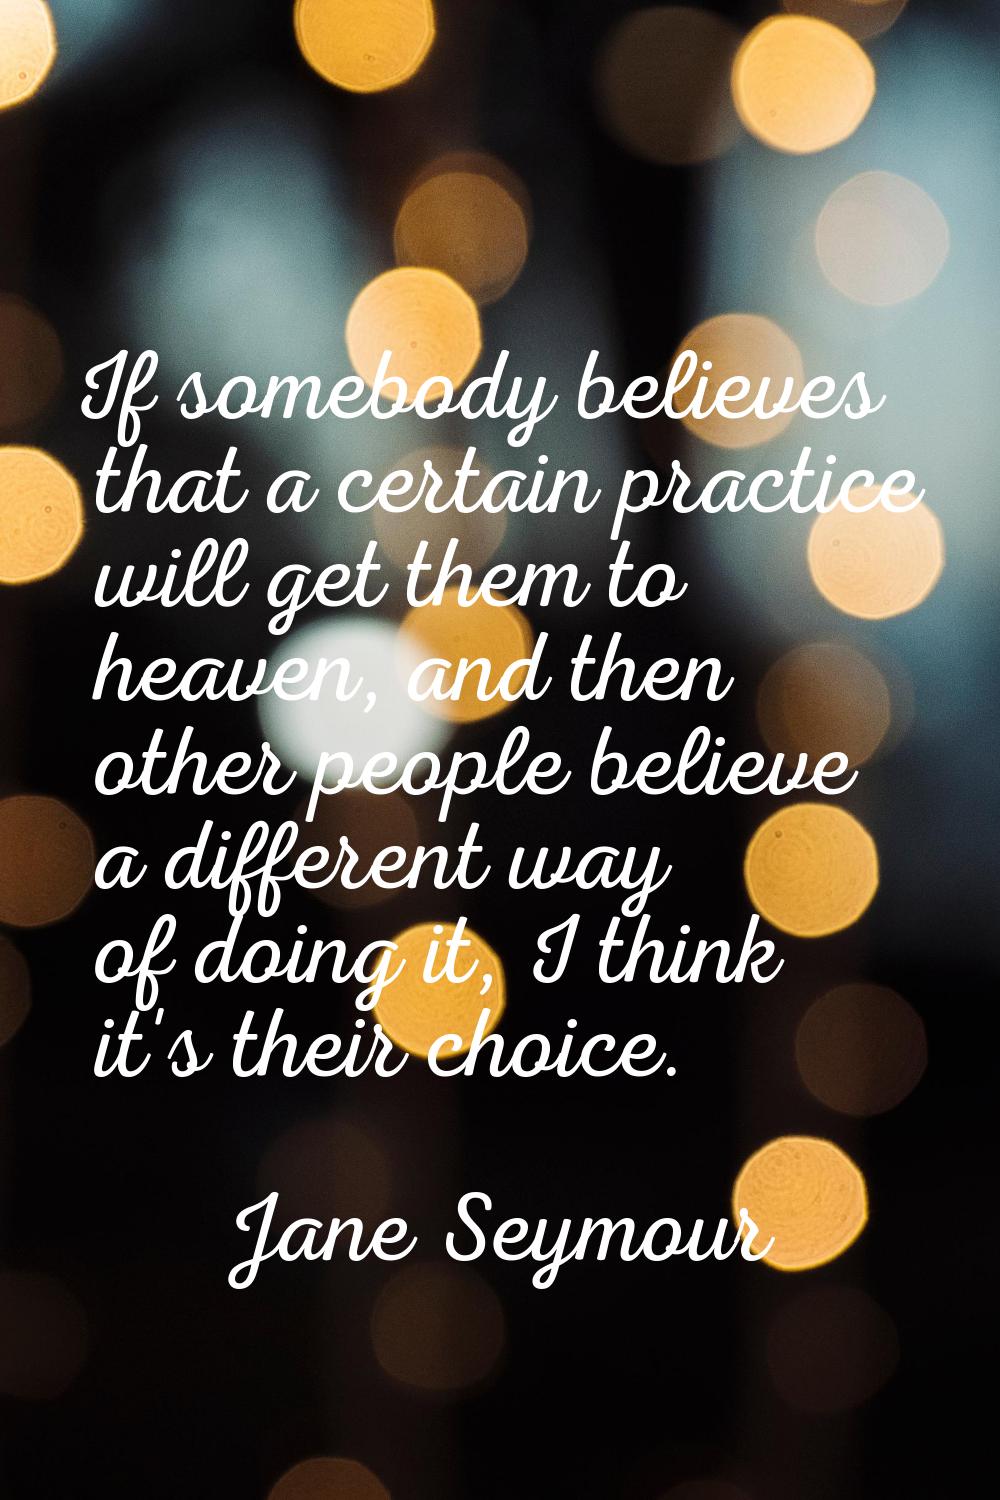 If somebody believes that a certain practice will get them to heaven, and then other people believe